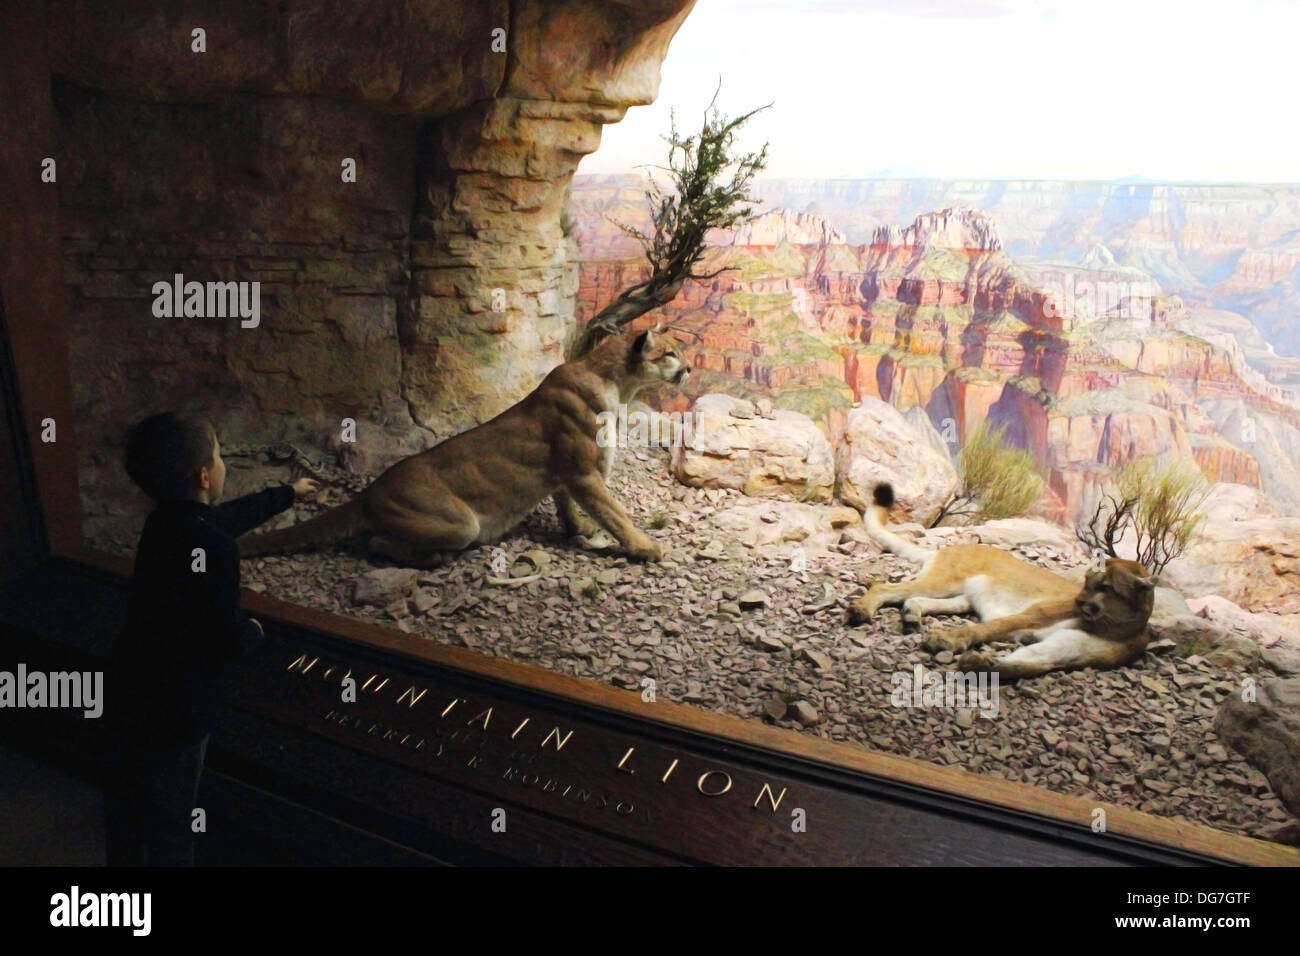 A small boy excitedly points to the Mountain Lions displayed in a diorama at the American Museum of Natural History. Stock Photo